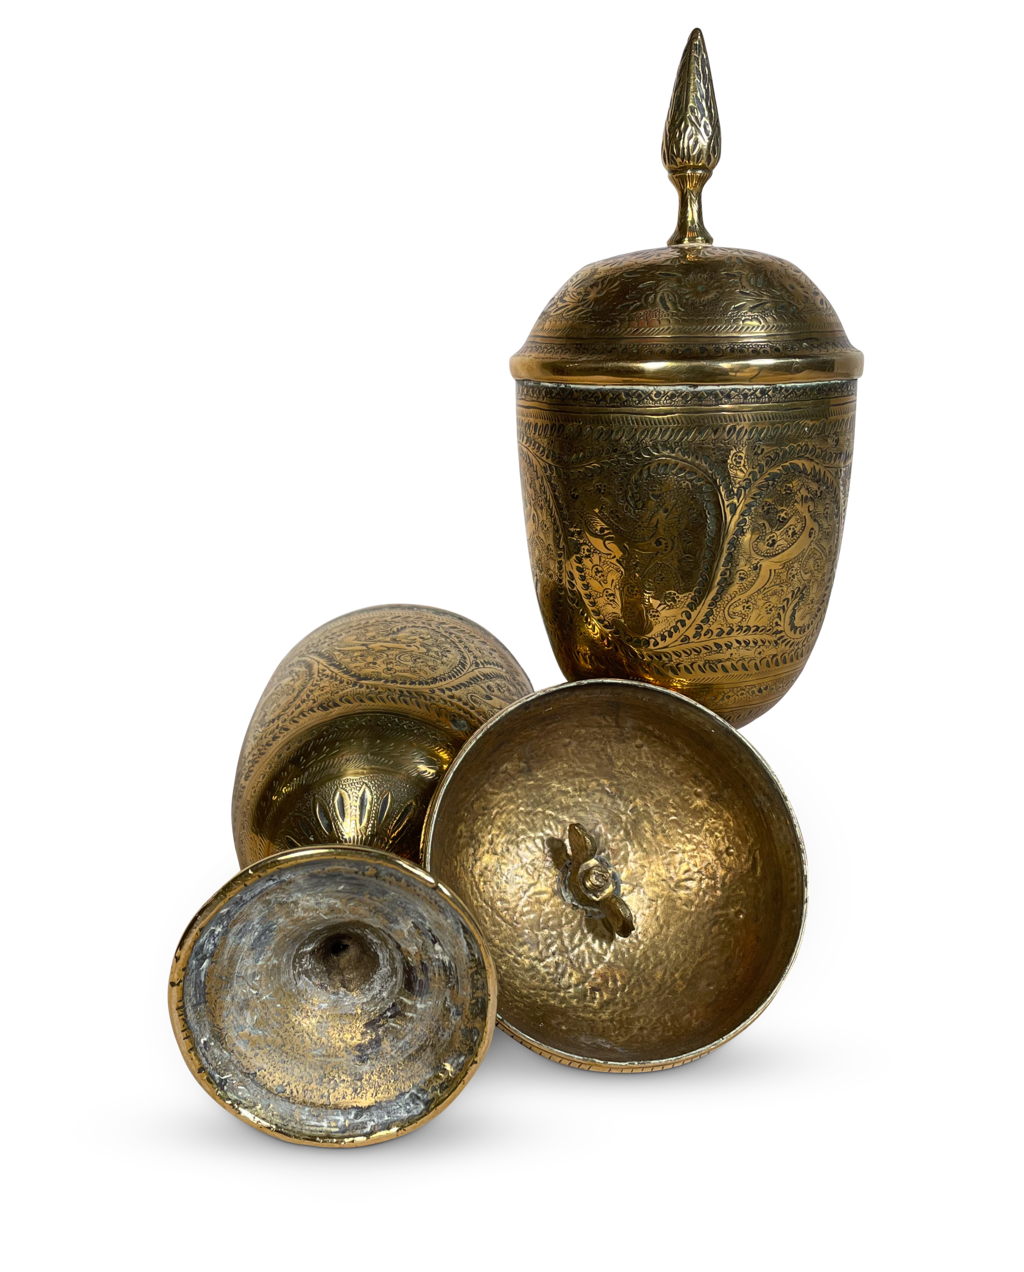 Pair of Lidded Chased Brass Anglo-Indian Urns